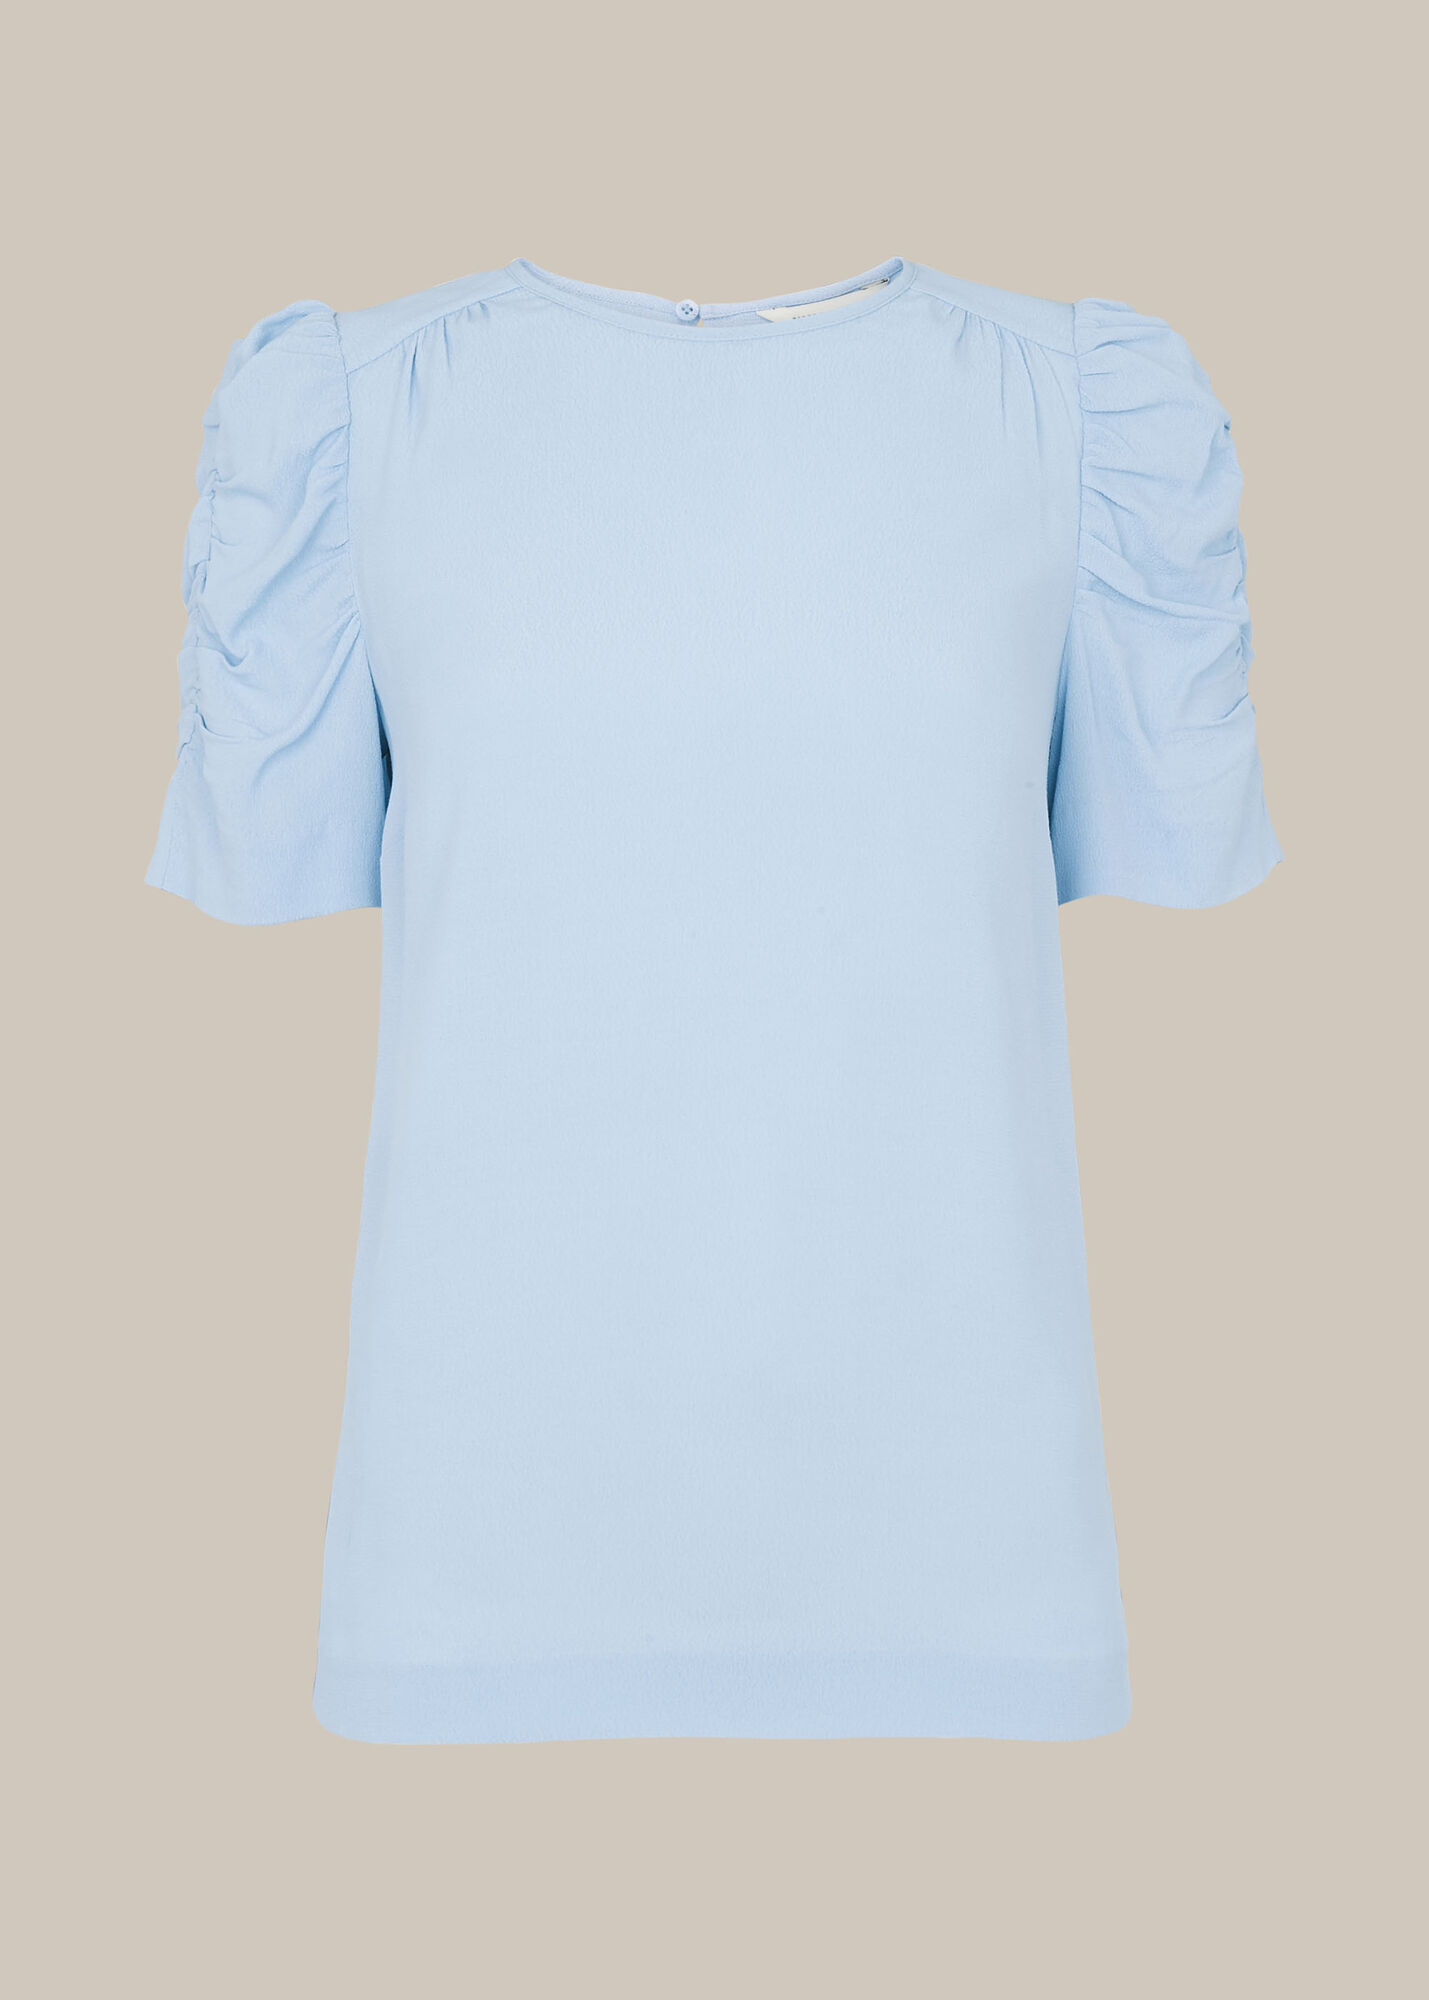 Pale Blue Nelly Shell Top | WHISTLES